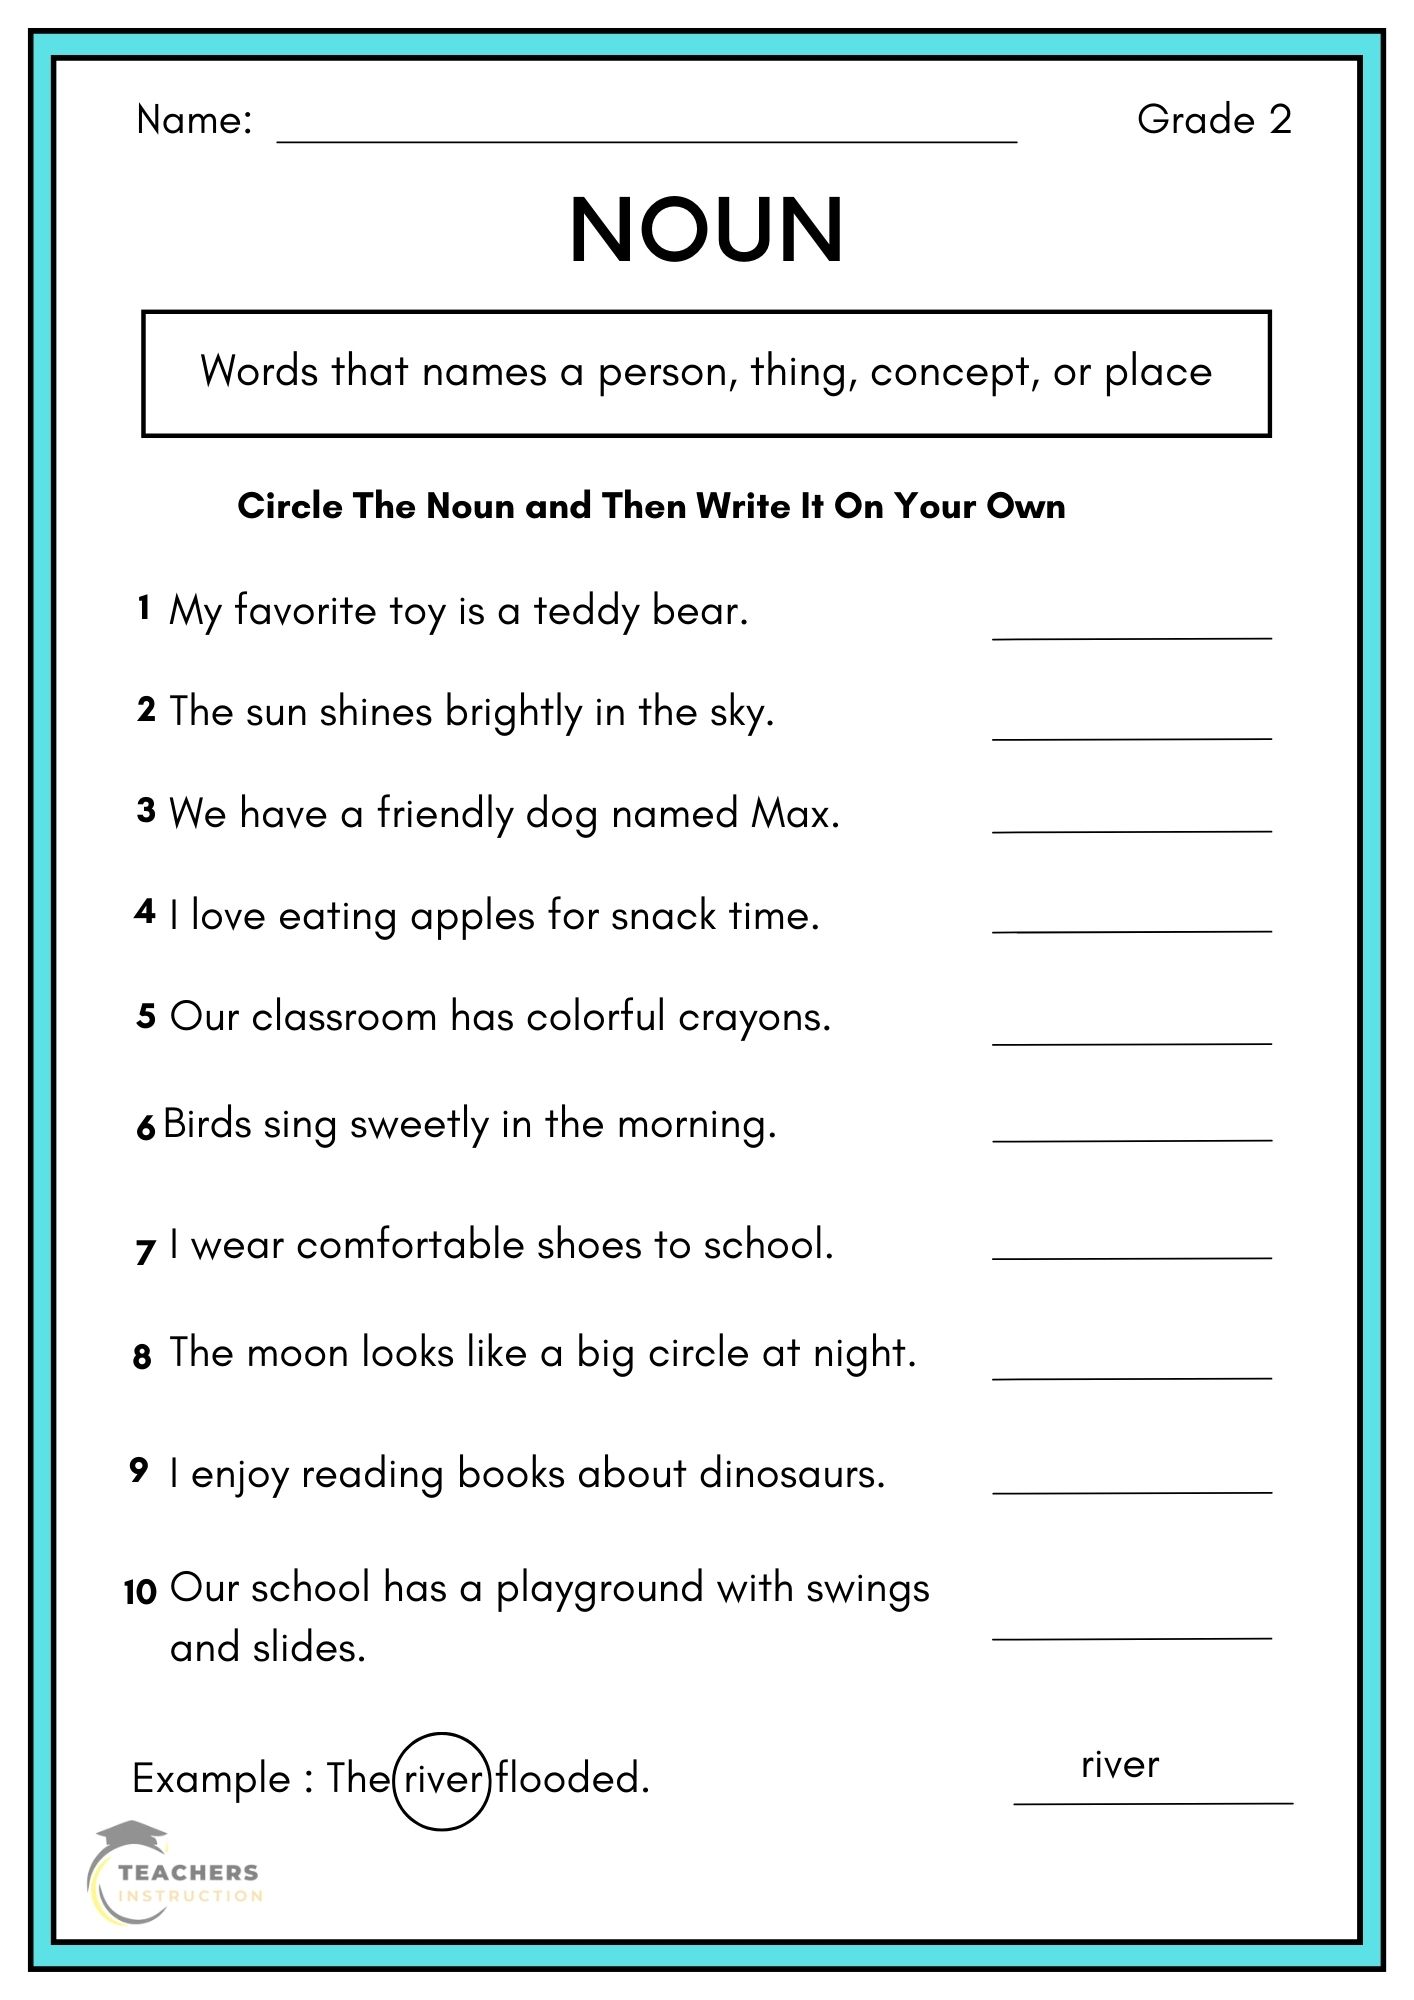 Teaching Strategies for Common and Proper Nouns - Lucky Little Learners